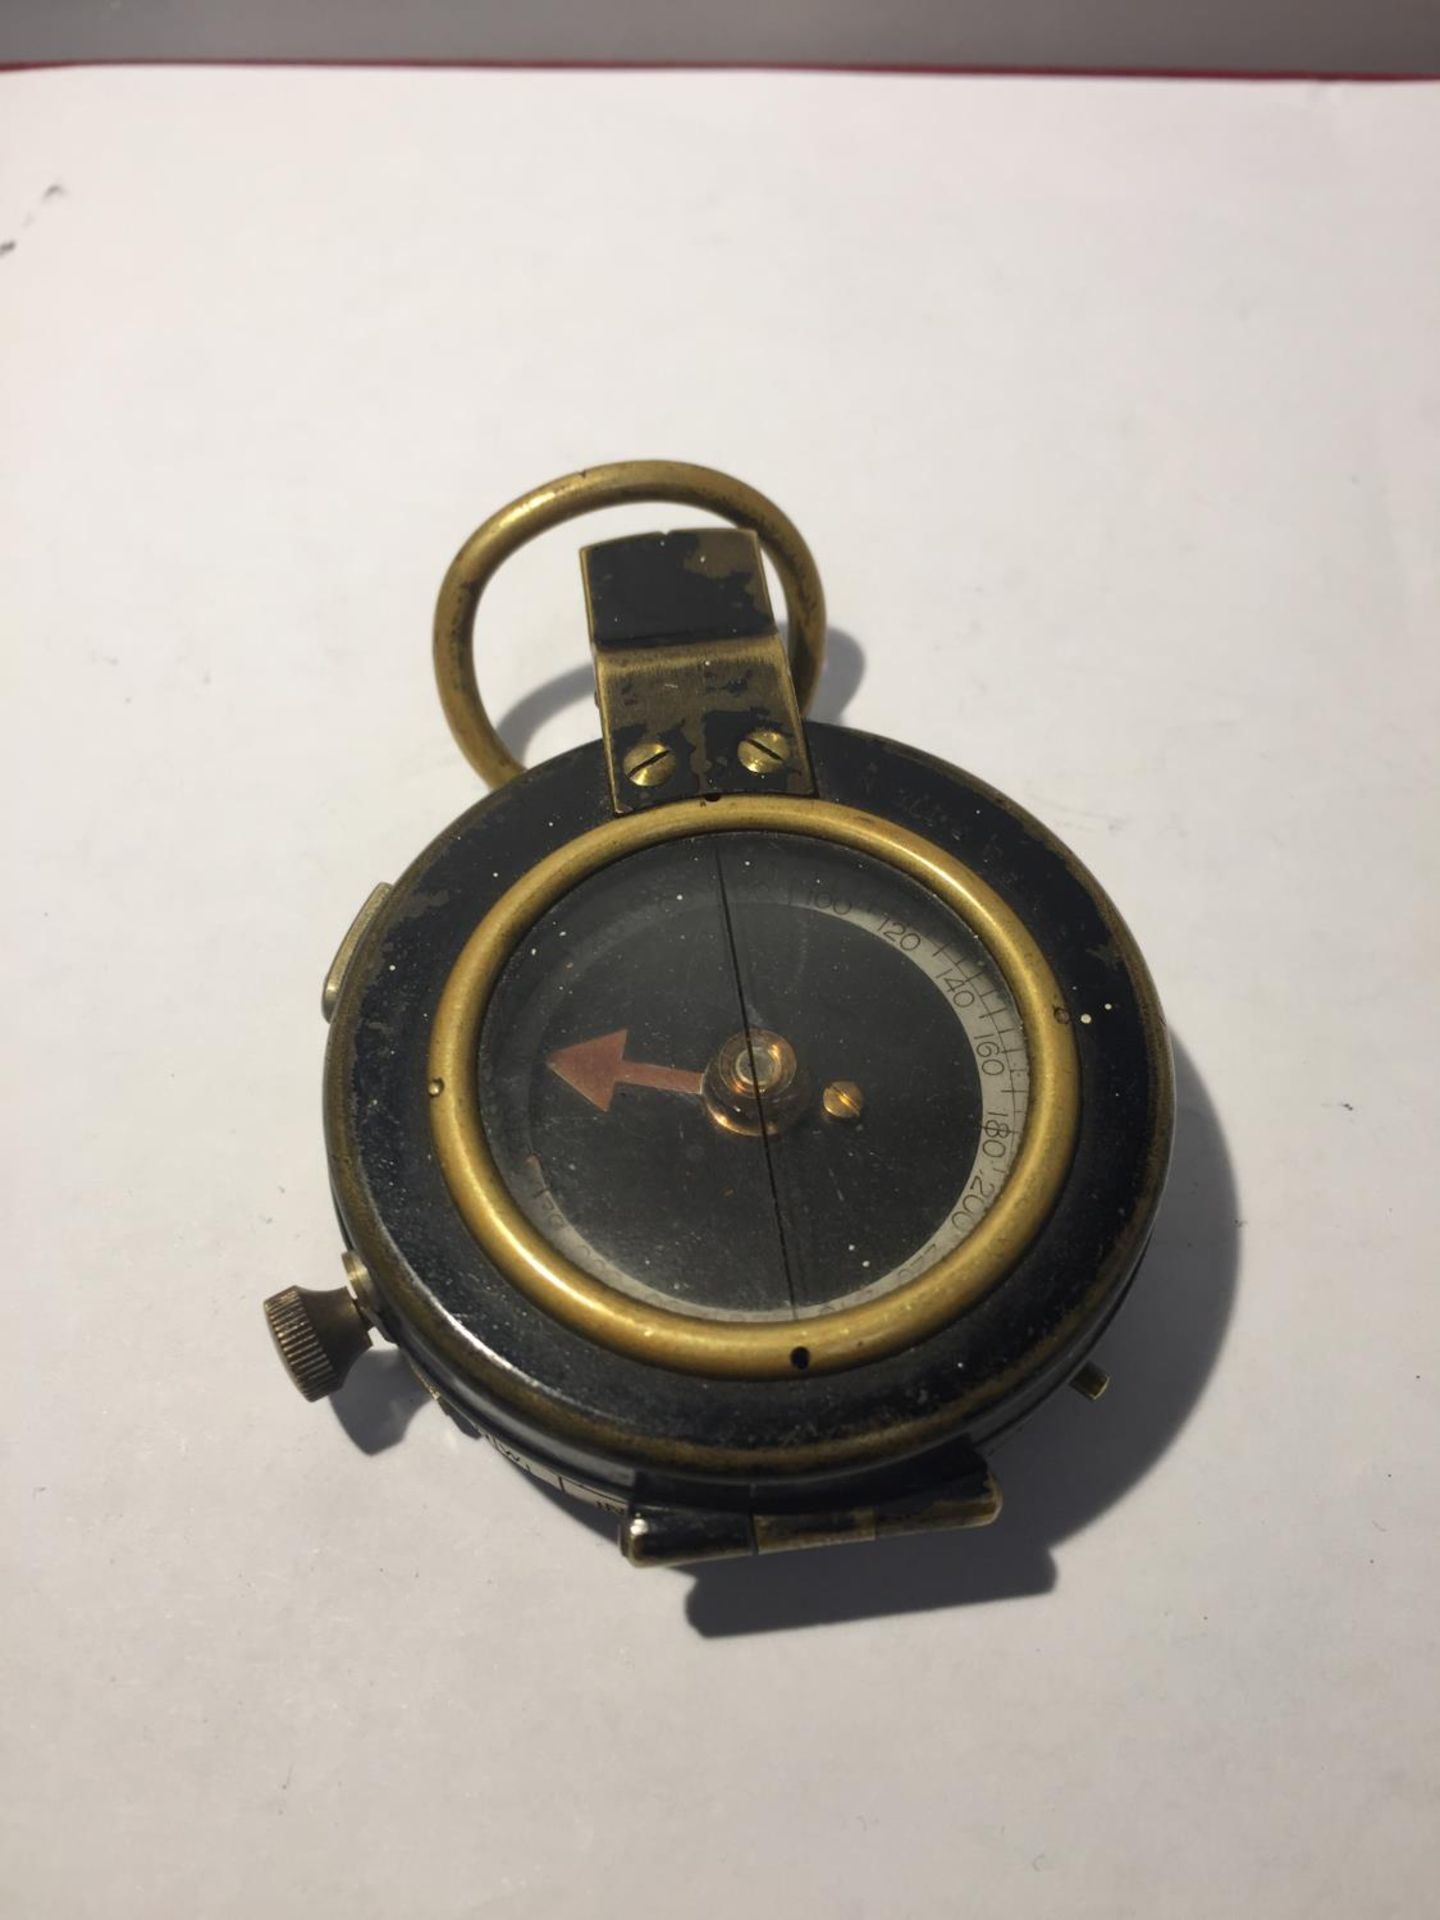 A MILITARY COMPASS DATED 1917